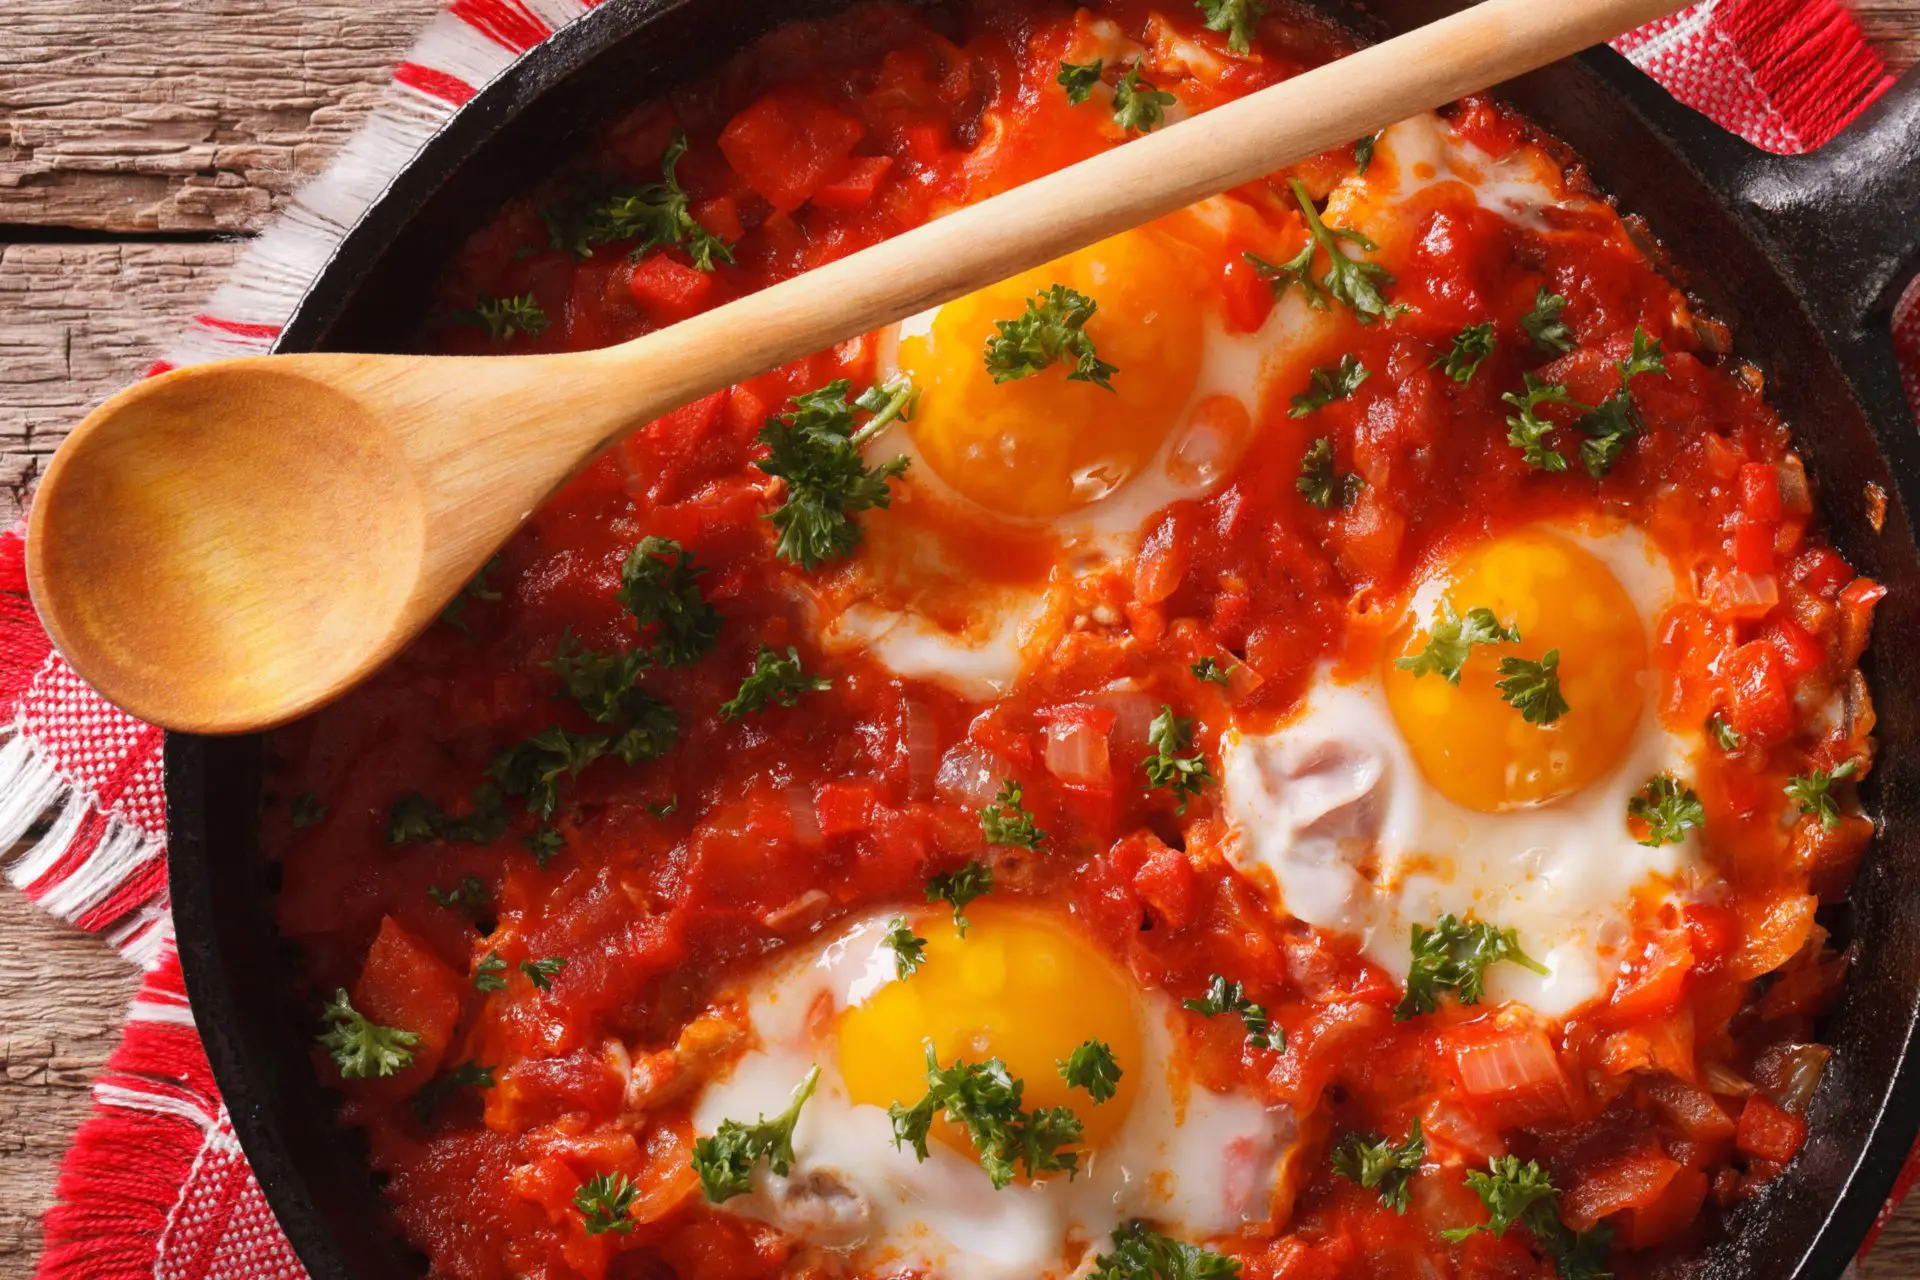 Eggs with tomatoes